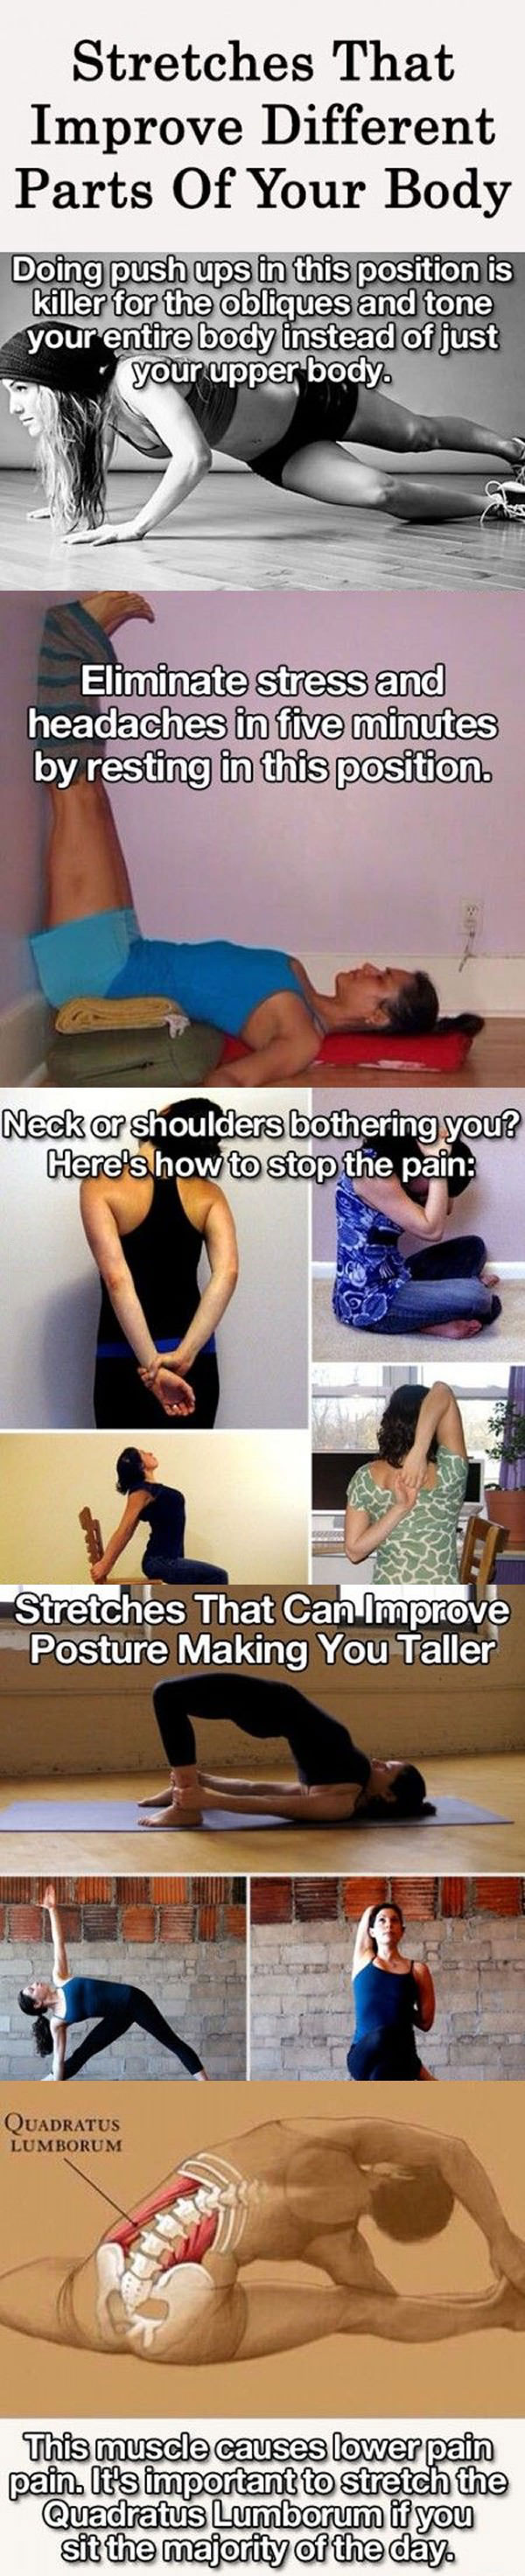 types of stretches that improve different parts of your body